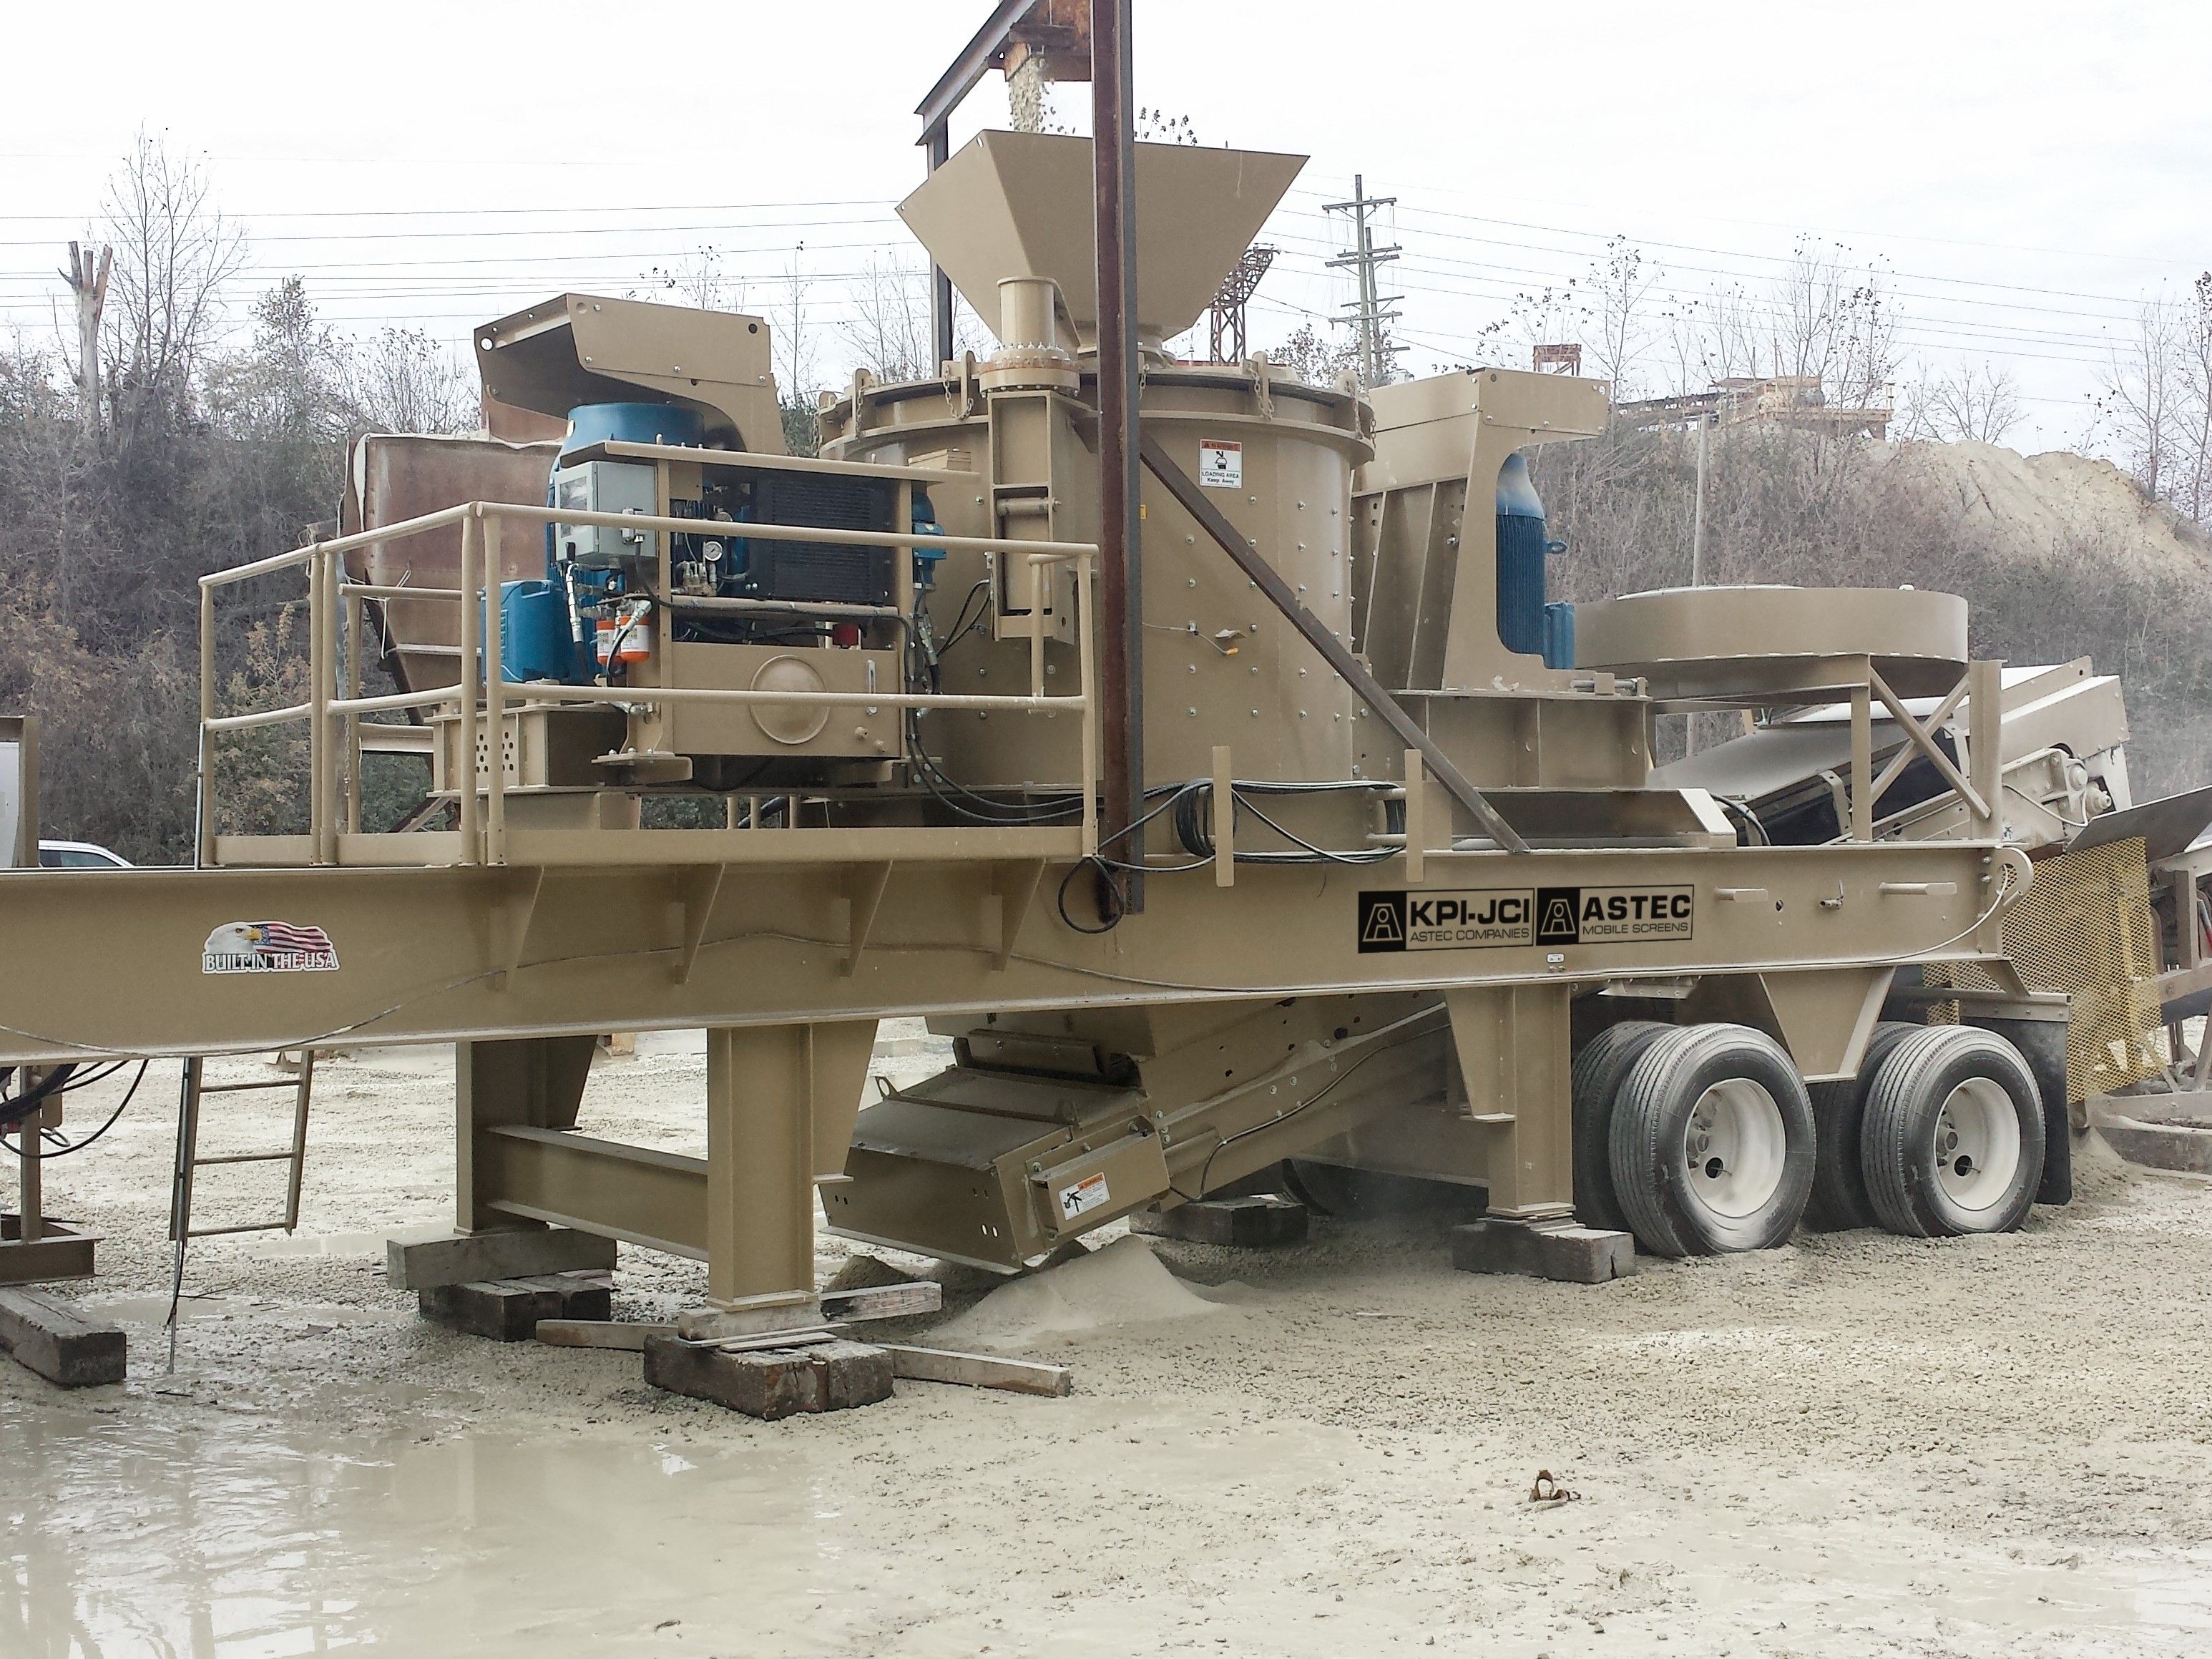 All You Need to Know About: Vertical Shaft Impactor (VSI) Primers